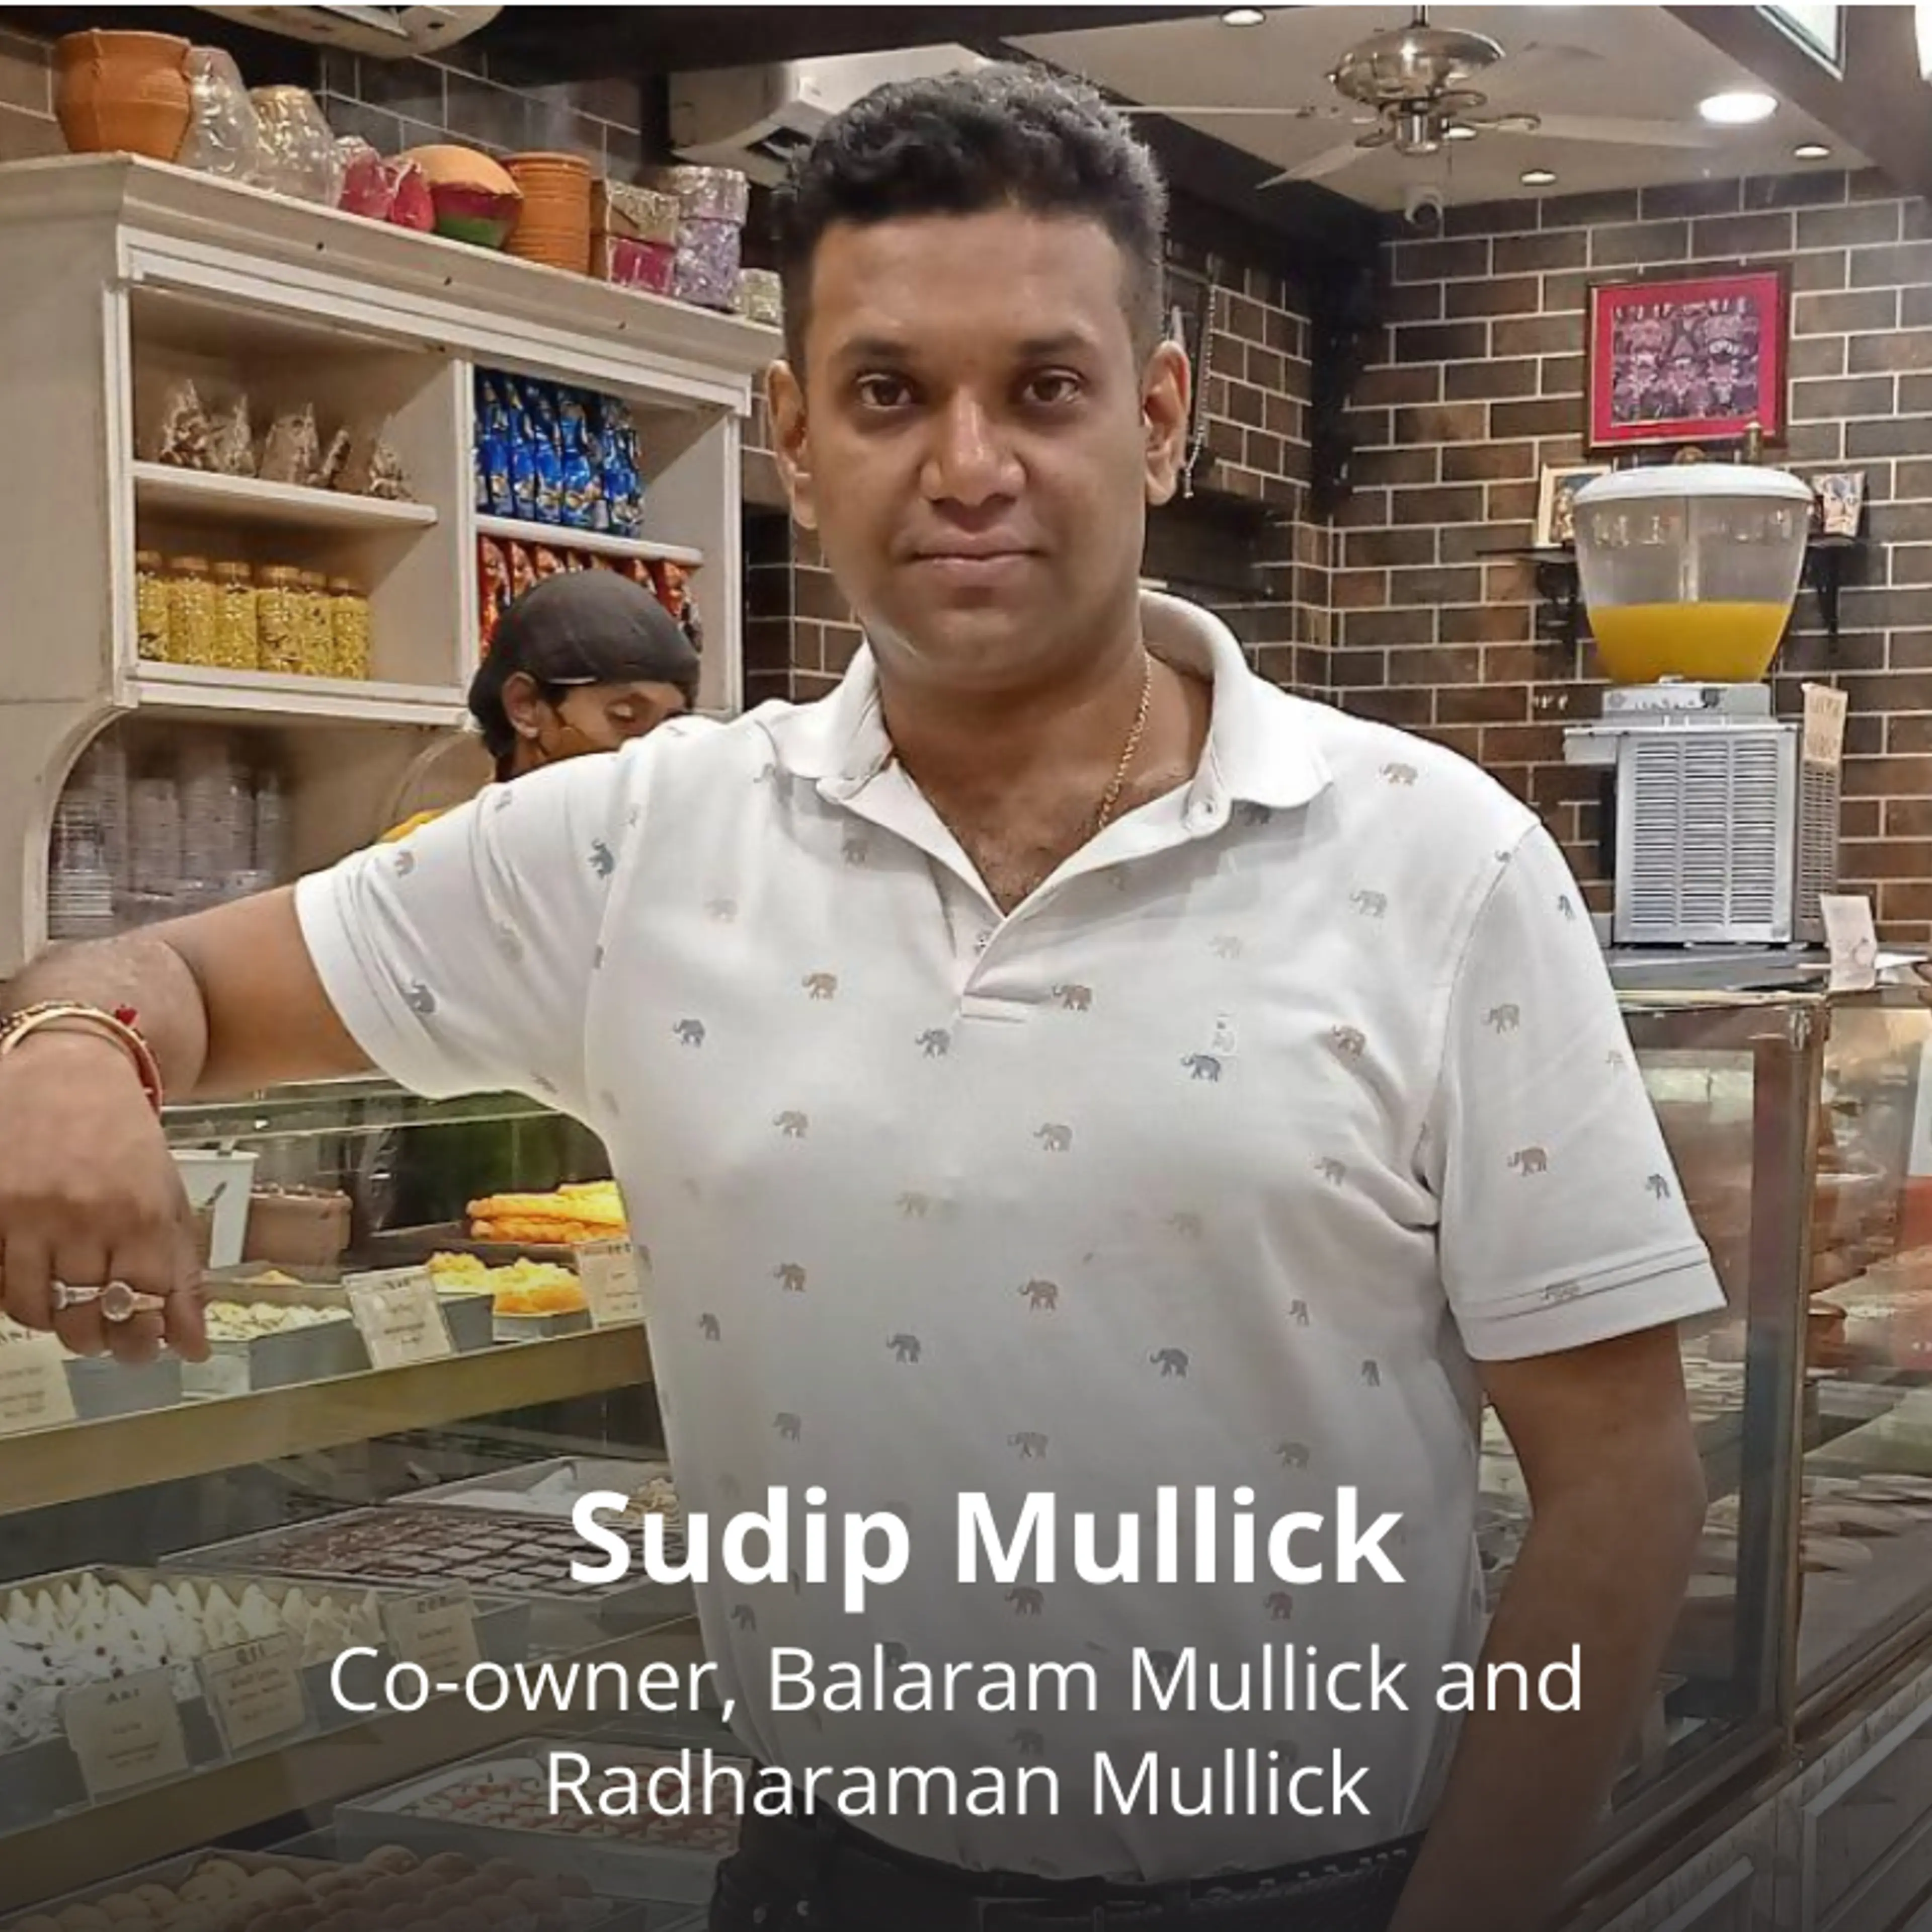 Meet the Mullick who is carrying on a ‘sweet’ business legacy of over 130 years in Kolkata